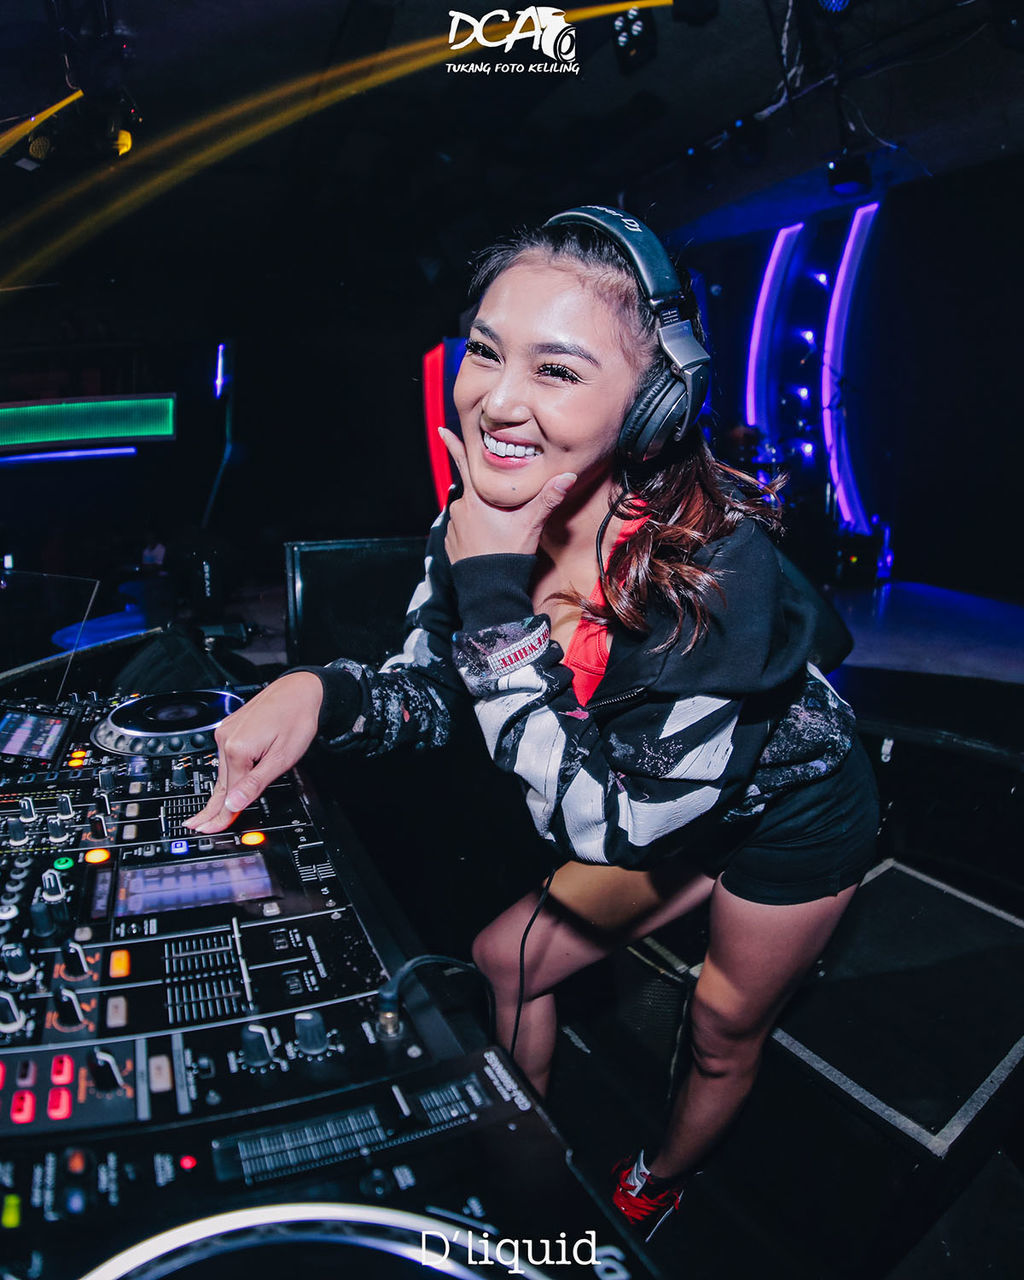 music, one person, arts culture and entertainment, adult, dj, technology, enjoyment, women, headphones, event, night, happiness, audio equipment, occupation, young adult, performance, listening, emotion, indoors, nightlife, smiling, sound mixer, nightclub, sound recording equipment, musician, cheerful, portrait